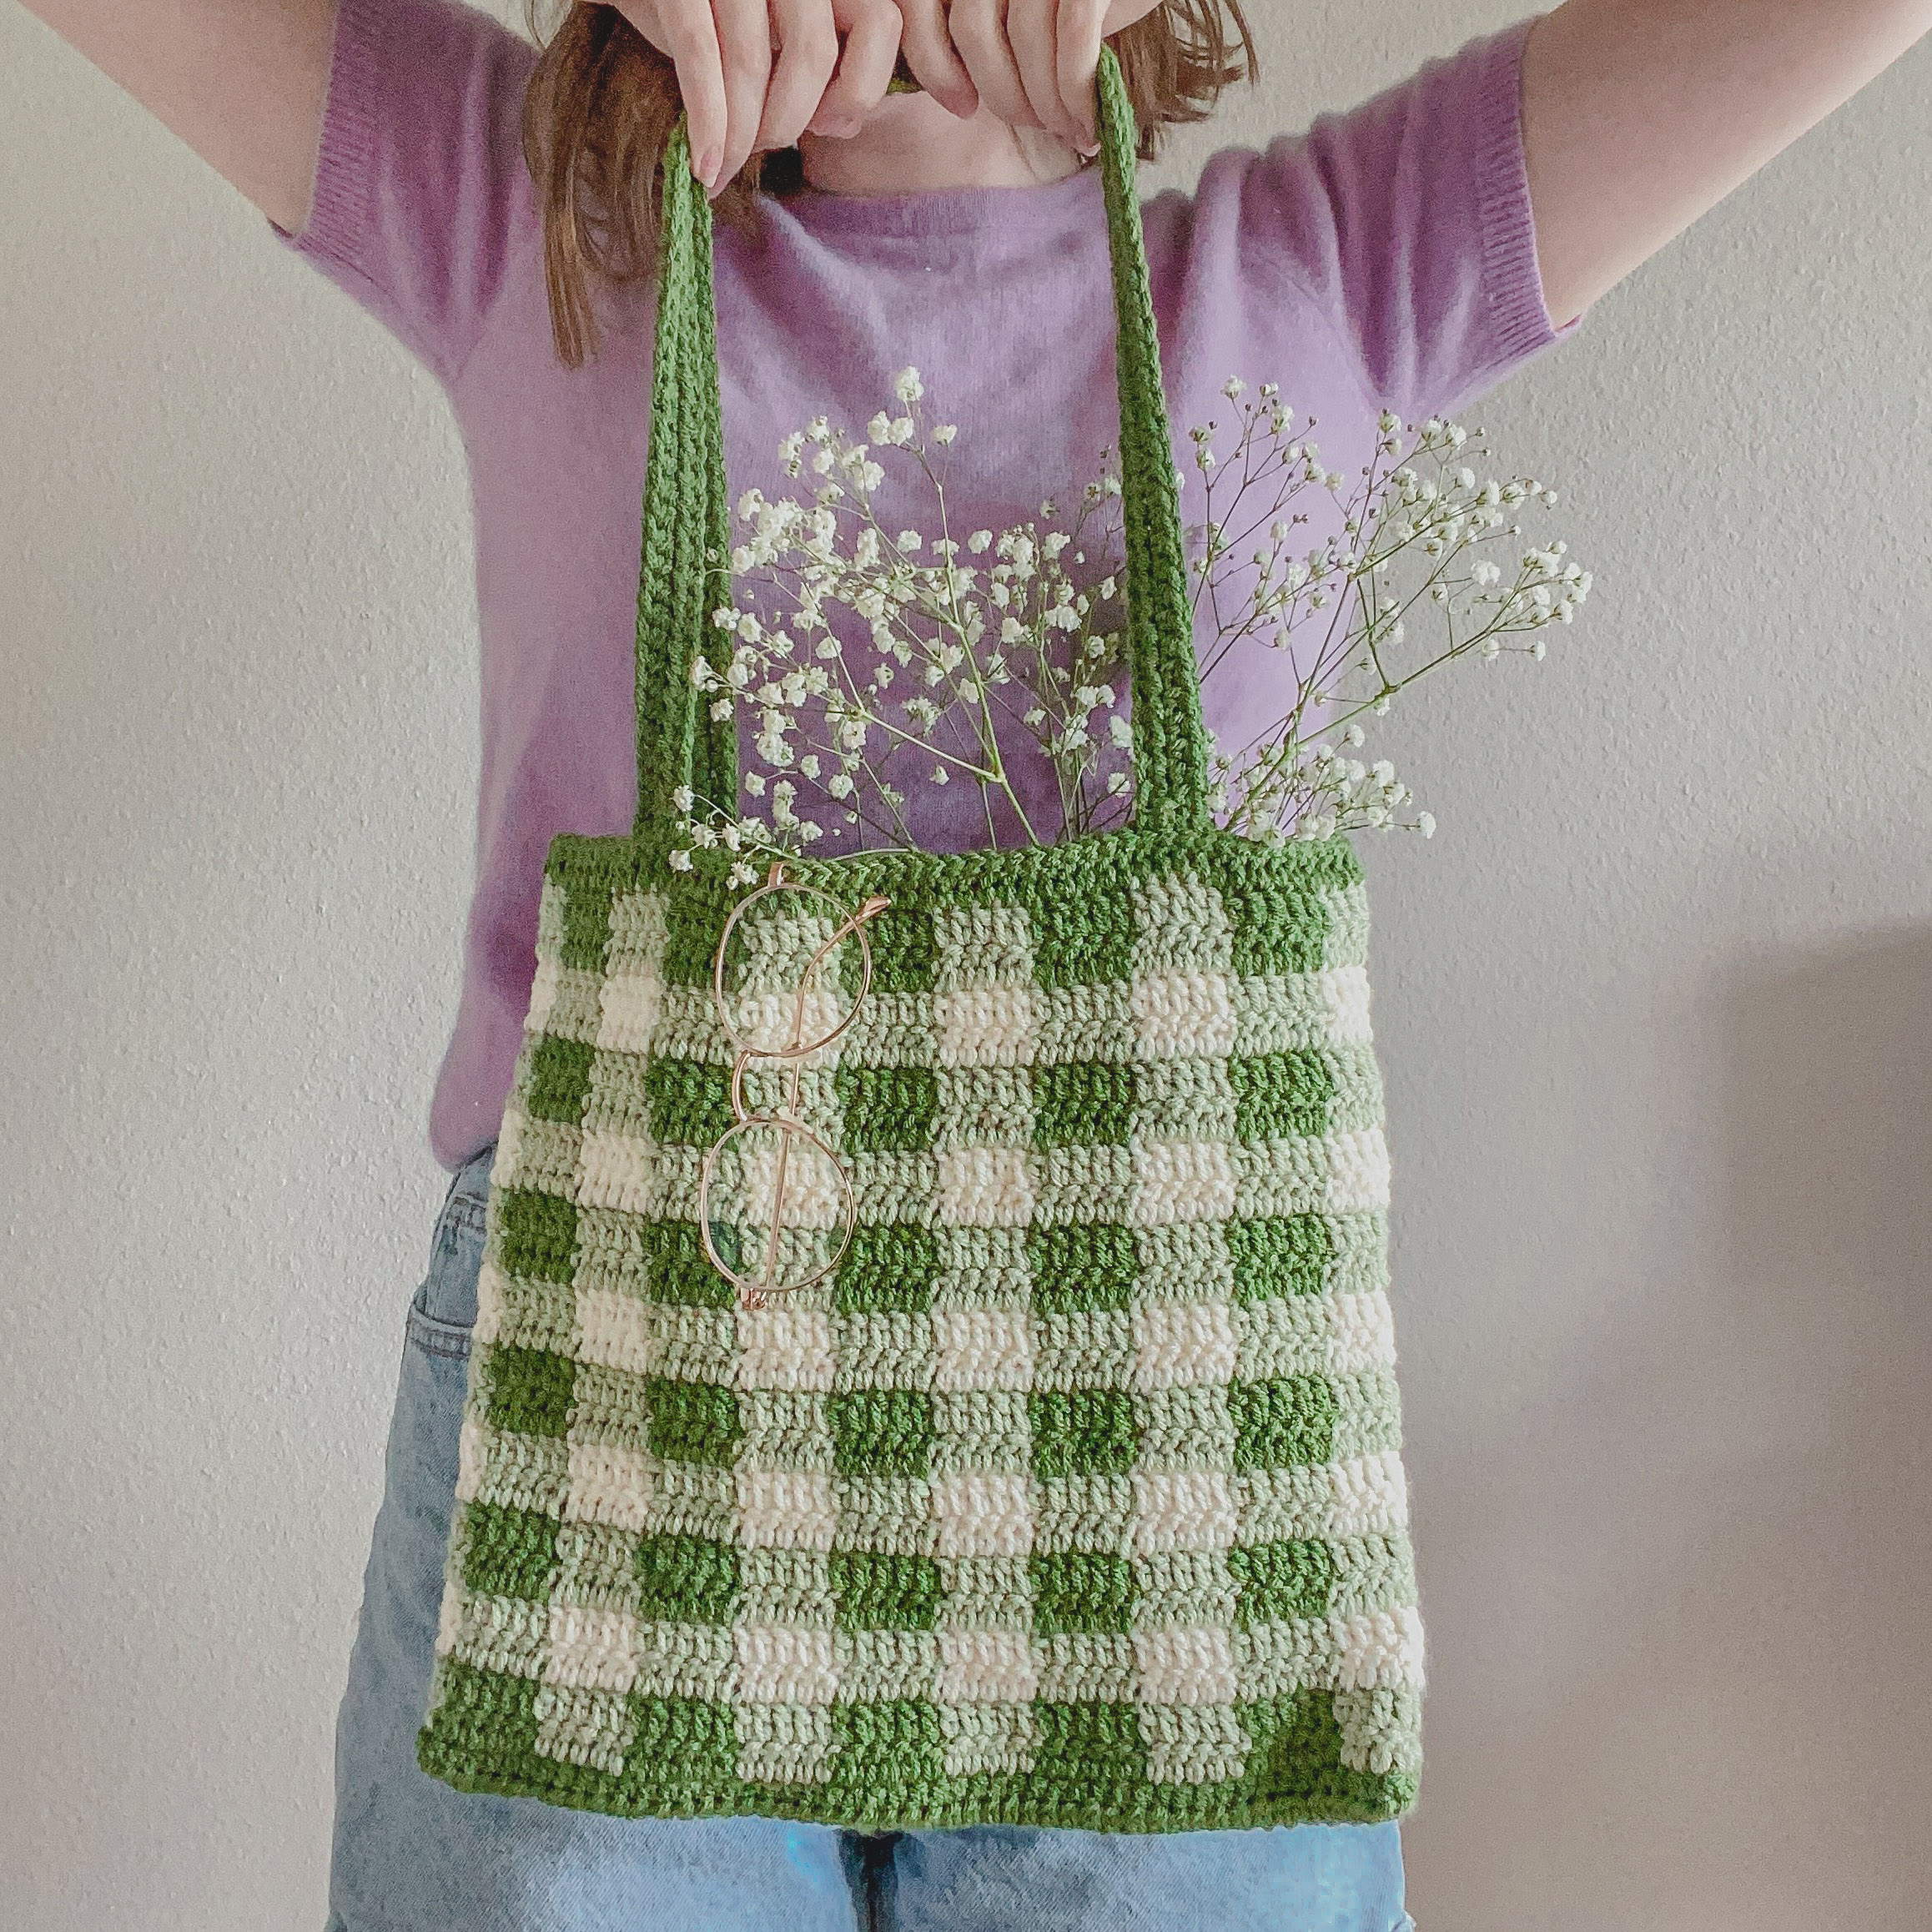 Bags Totes - Page 3 of 7 - Free Crochet Patterns